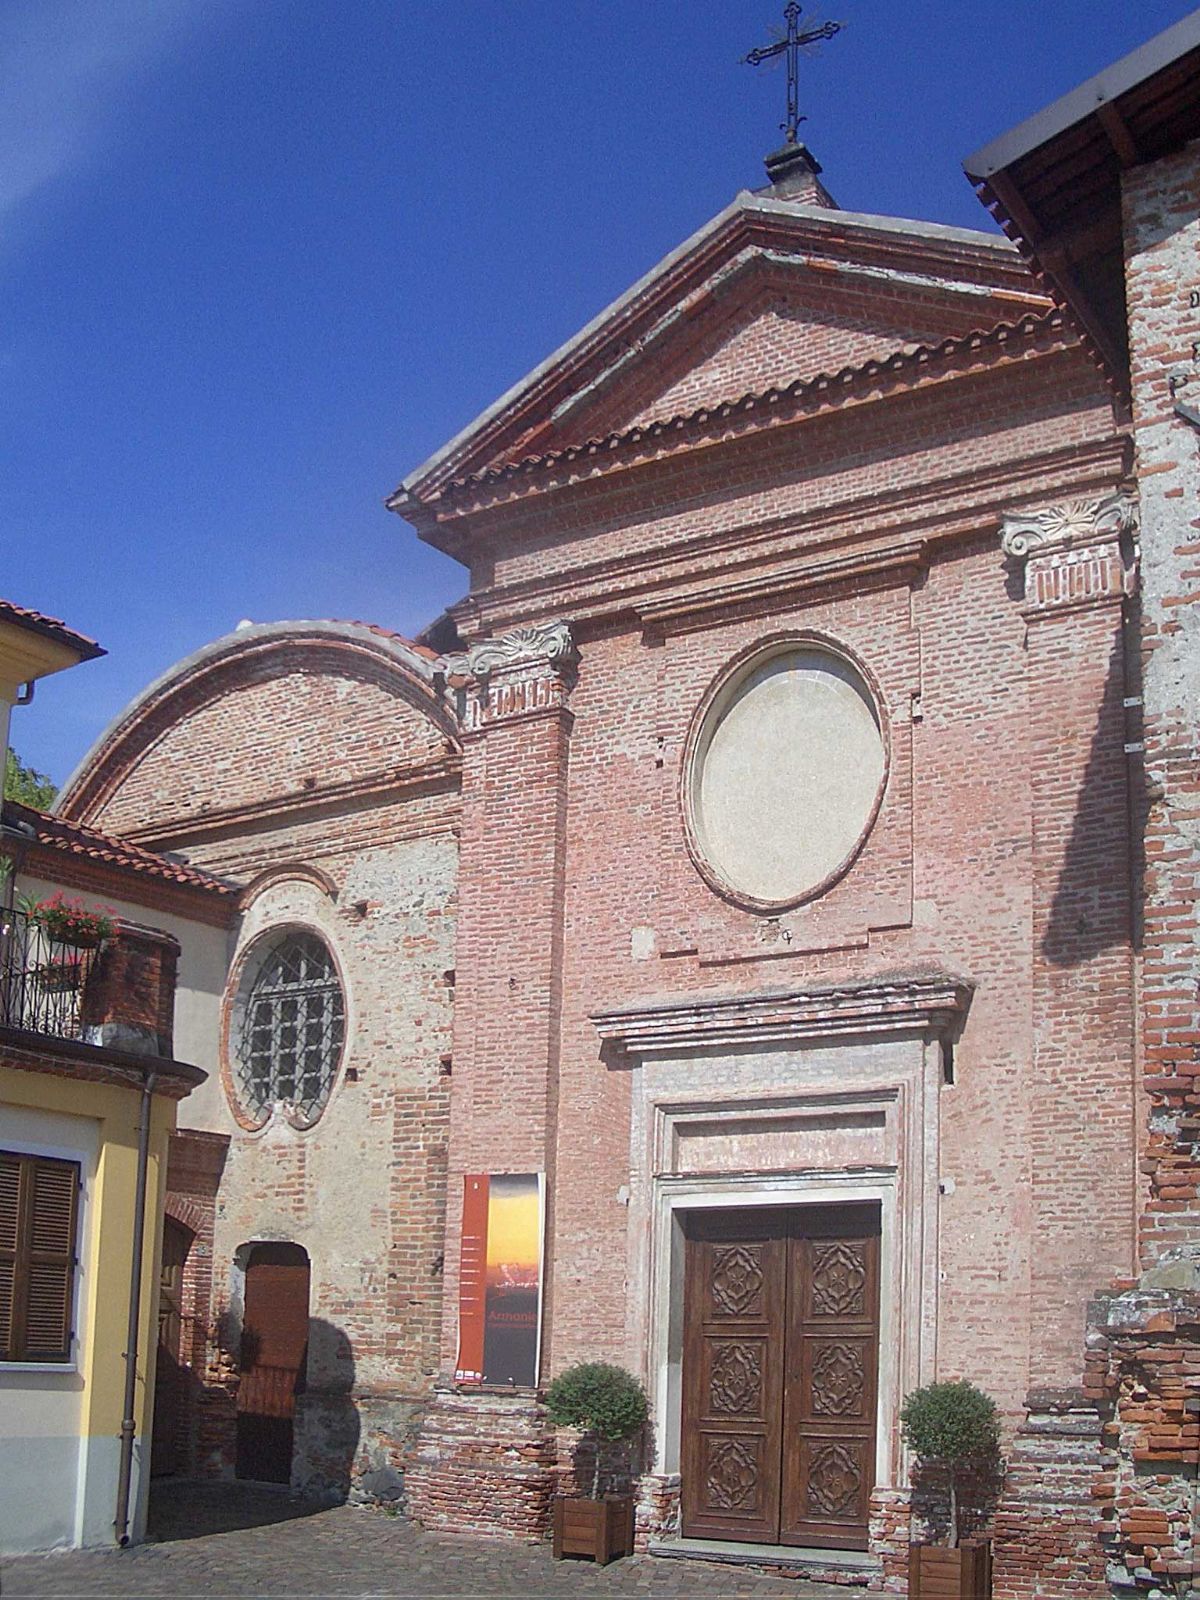 Le due chiese parrocchiali @ Romano Canavese